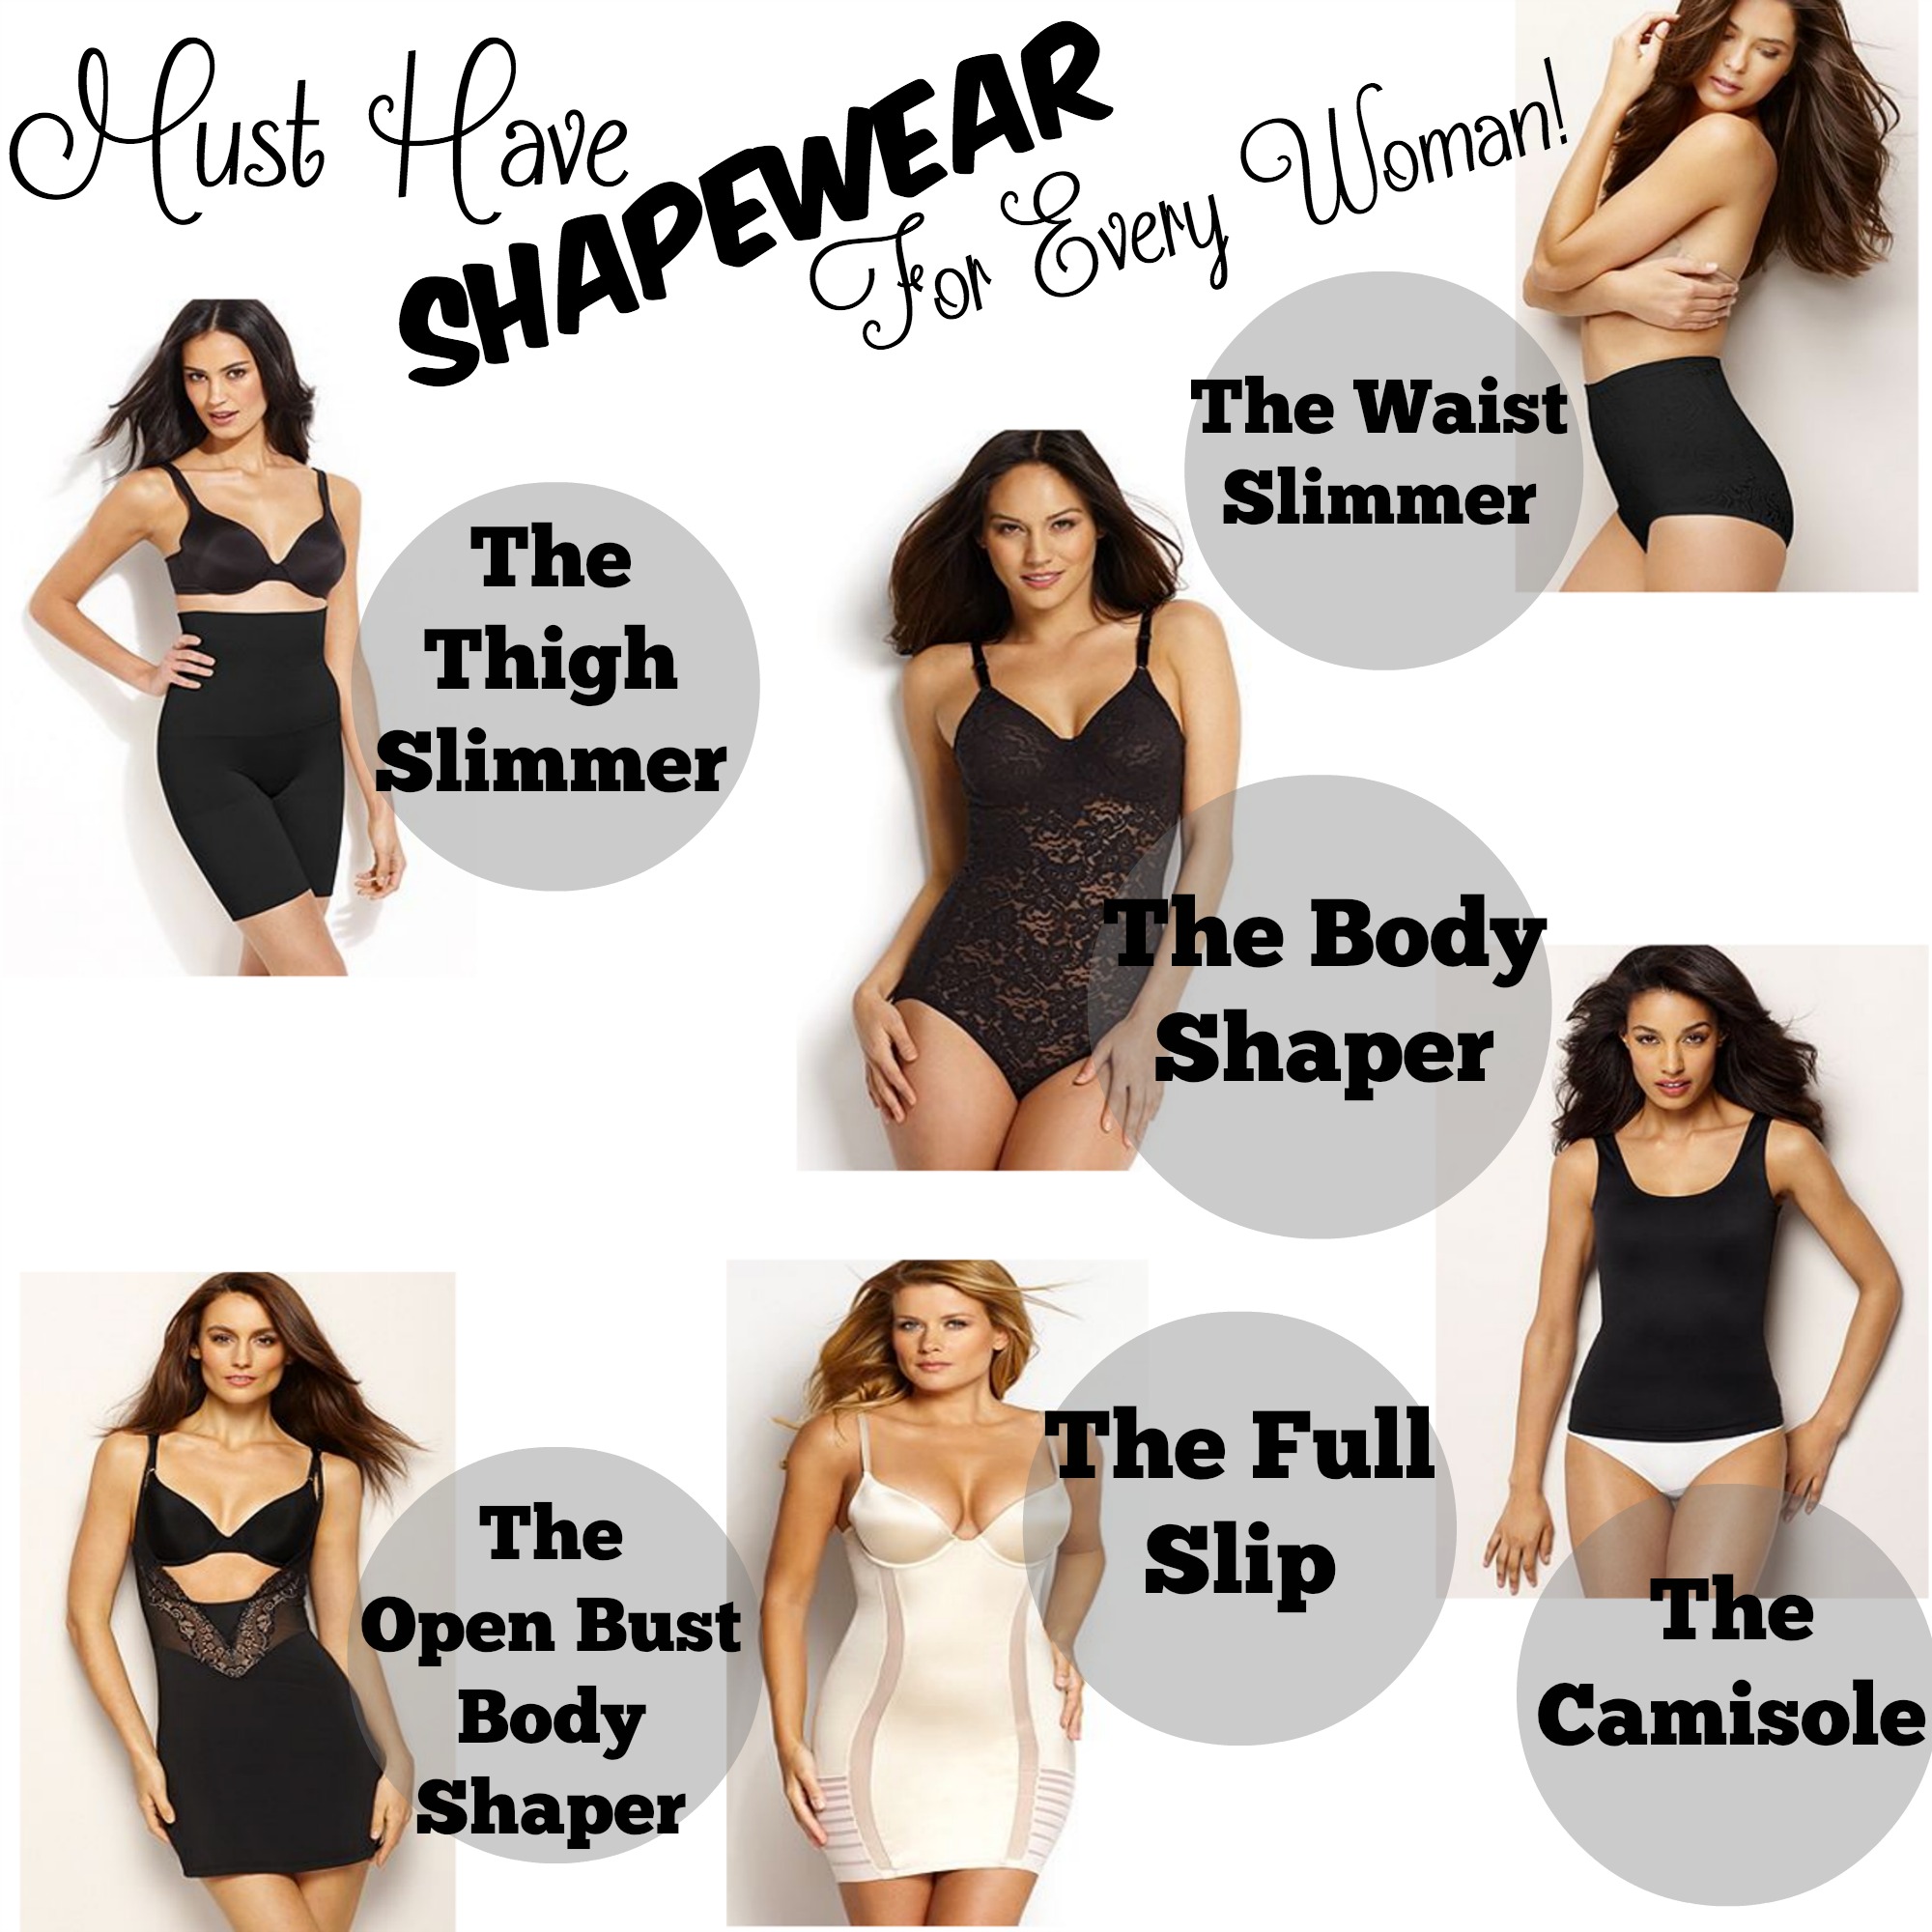 Replying to @sassabellaa334 what other shapewear do yall want me